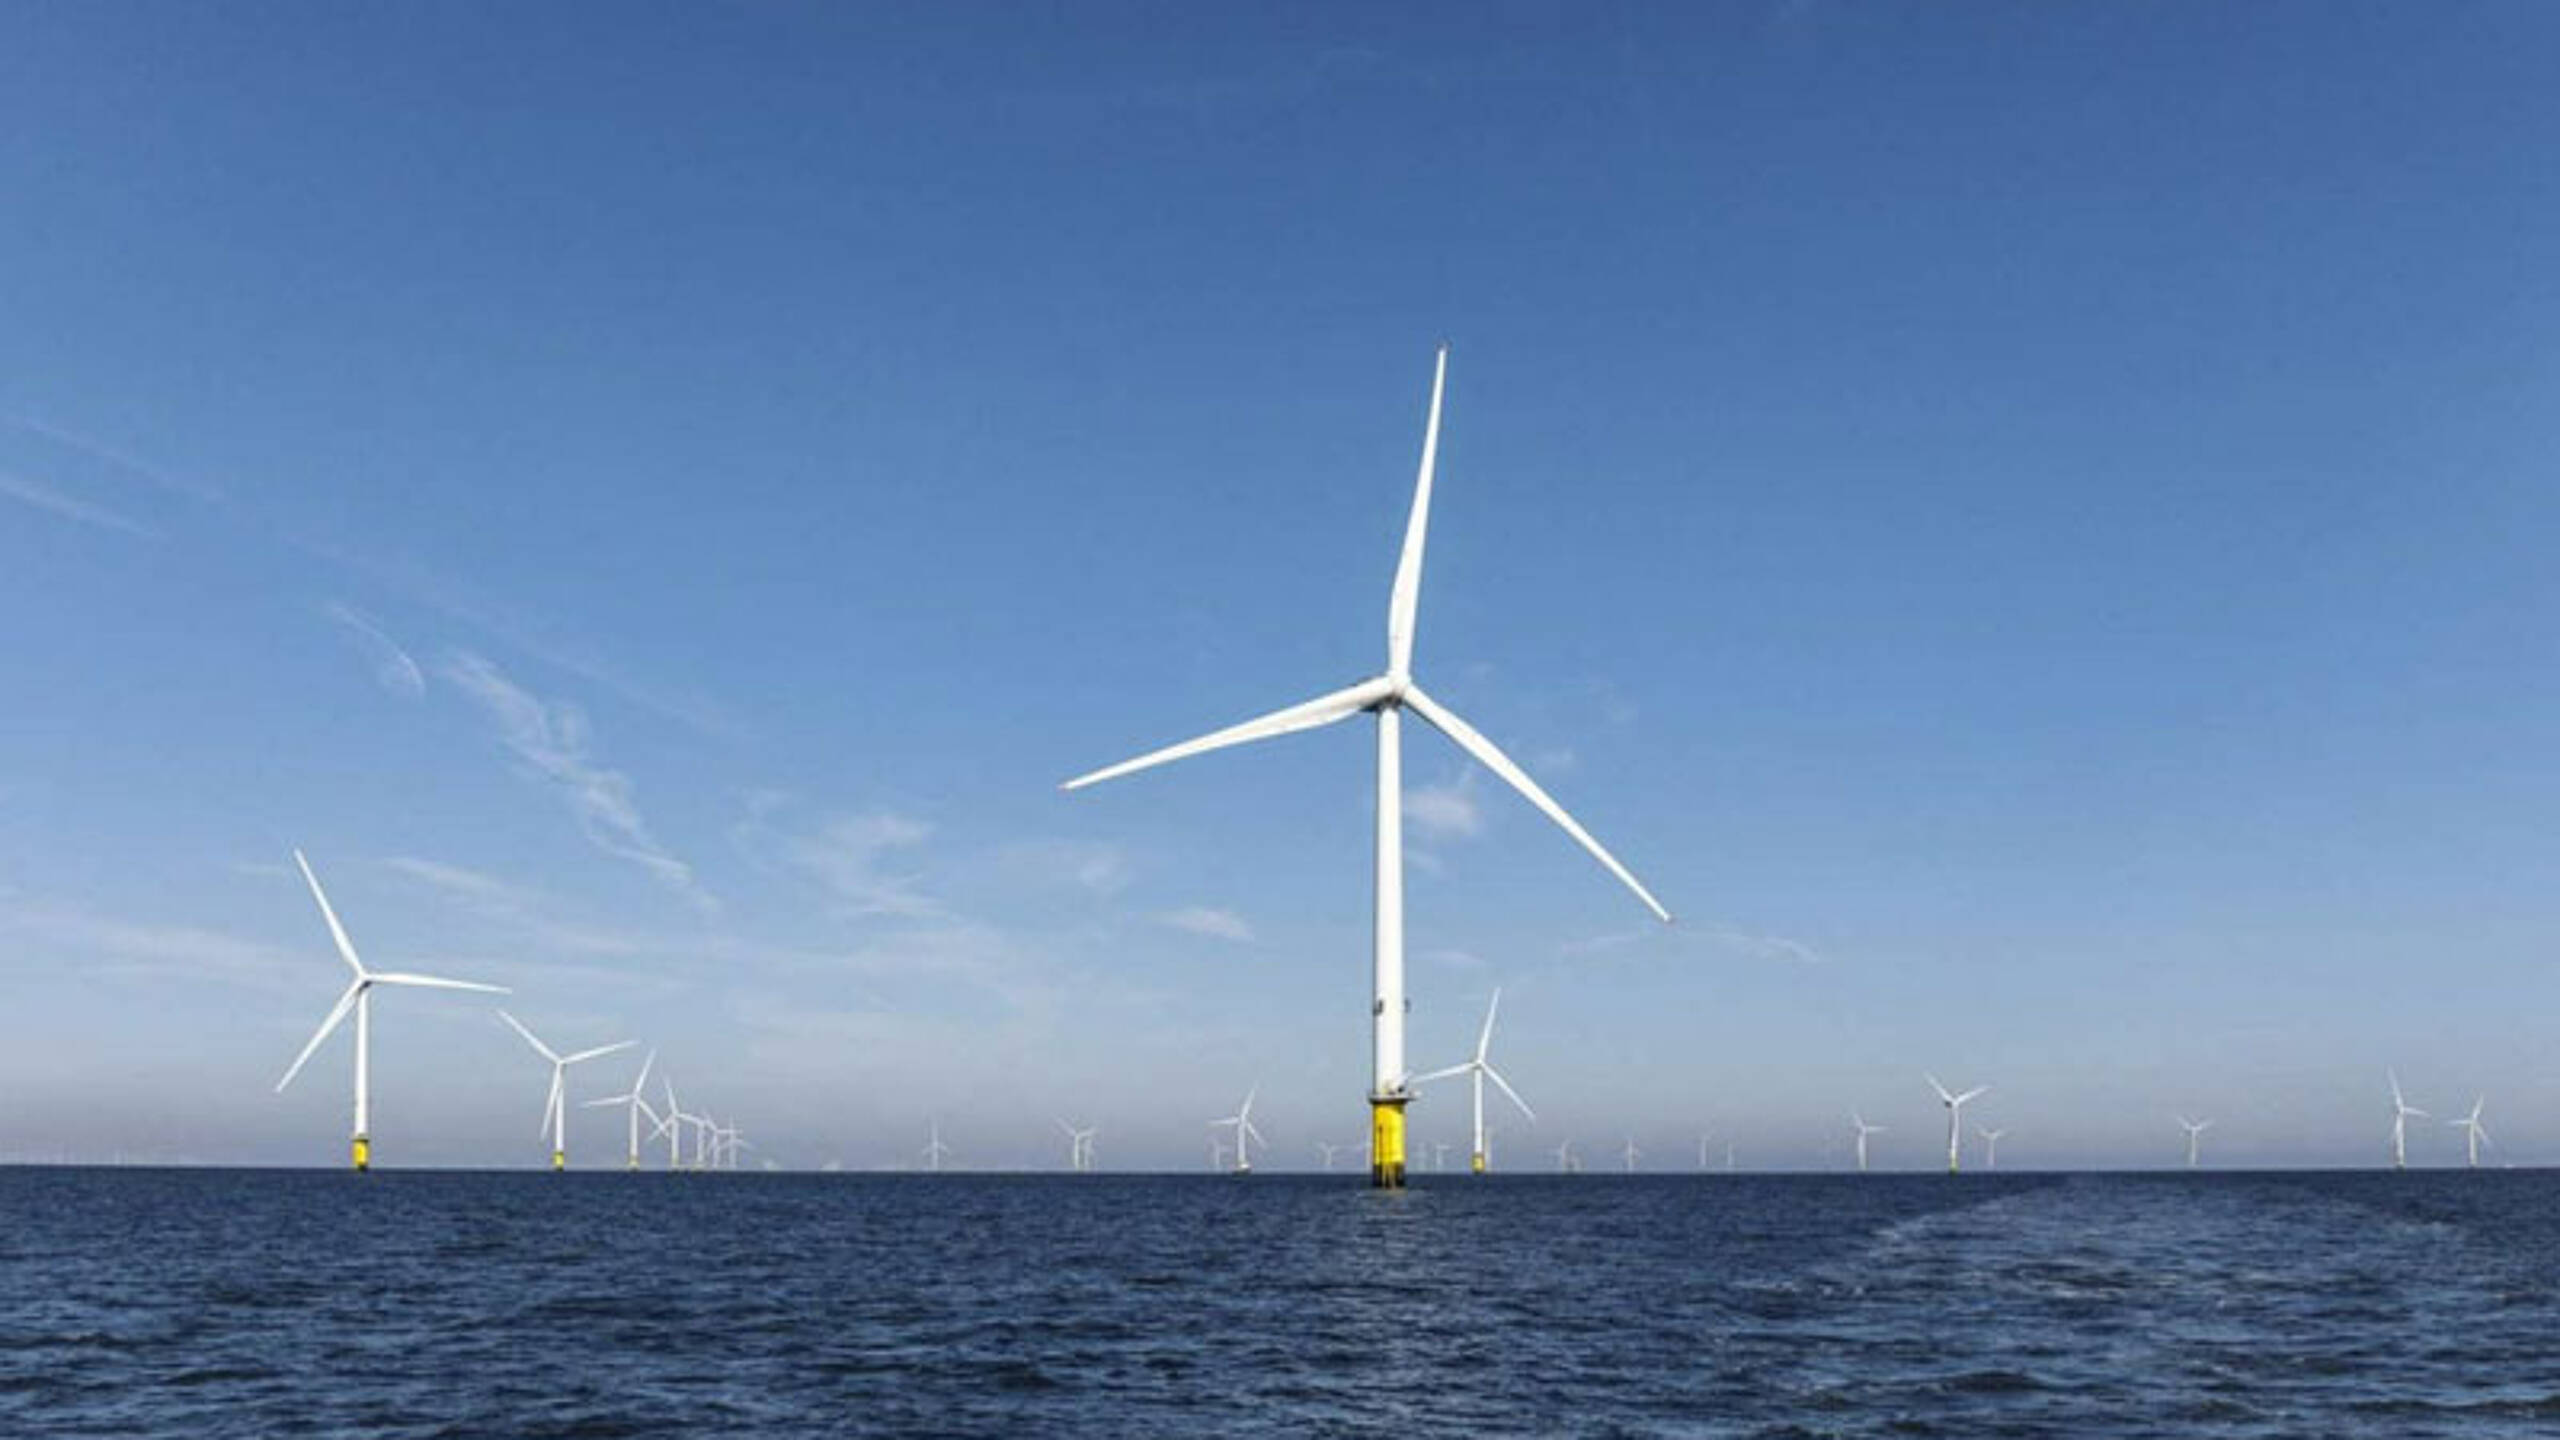 World's largest offshore wind farm to built in UK